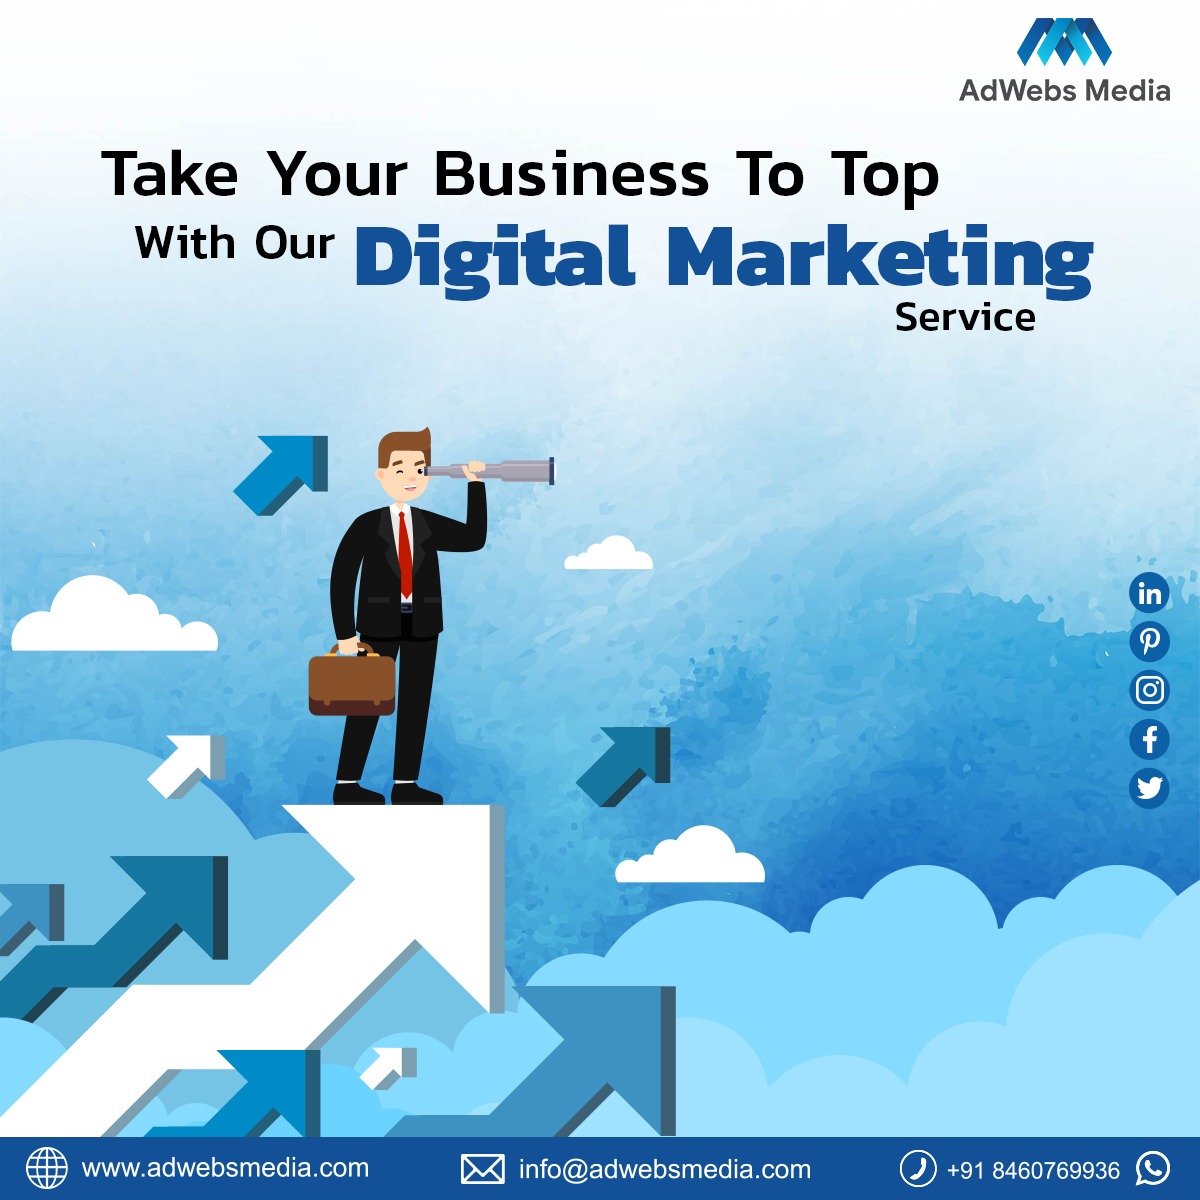 Take Your Business to Top with our Digital Marketing Service!!

#business #topbusiness  #digitalmarketingagency #DigitalMarketingServices #godigital #360DegreeDigitalMarketing #DigitalMarketing #socialmediapost #festivalpost #seo #facebookads #GoogleAds #Chatbot #YouTubeSEO